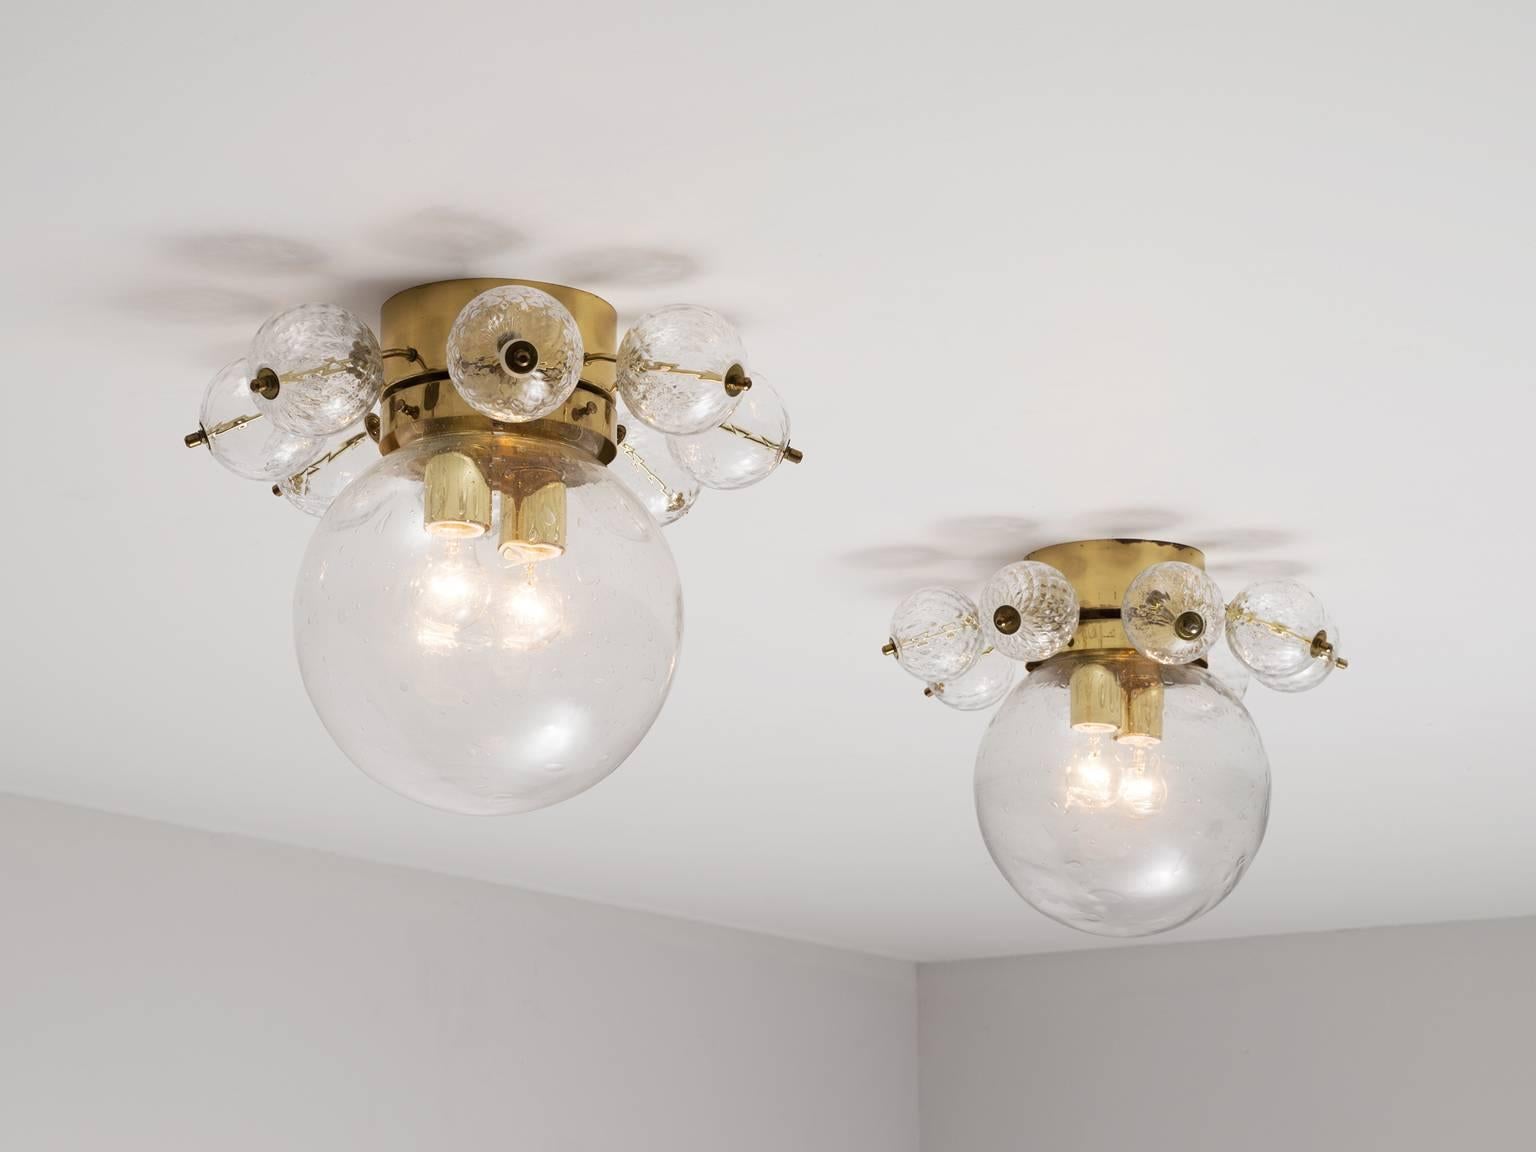 Set of two ceiling lights in glass and brass, Europe, 1970s.

Pair of ceiling lights in brass and structured glass. Consisting of one large sphere of slightly structured glass with two-light points. Decorated with brass and structured glass